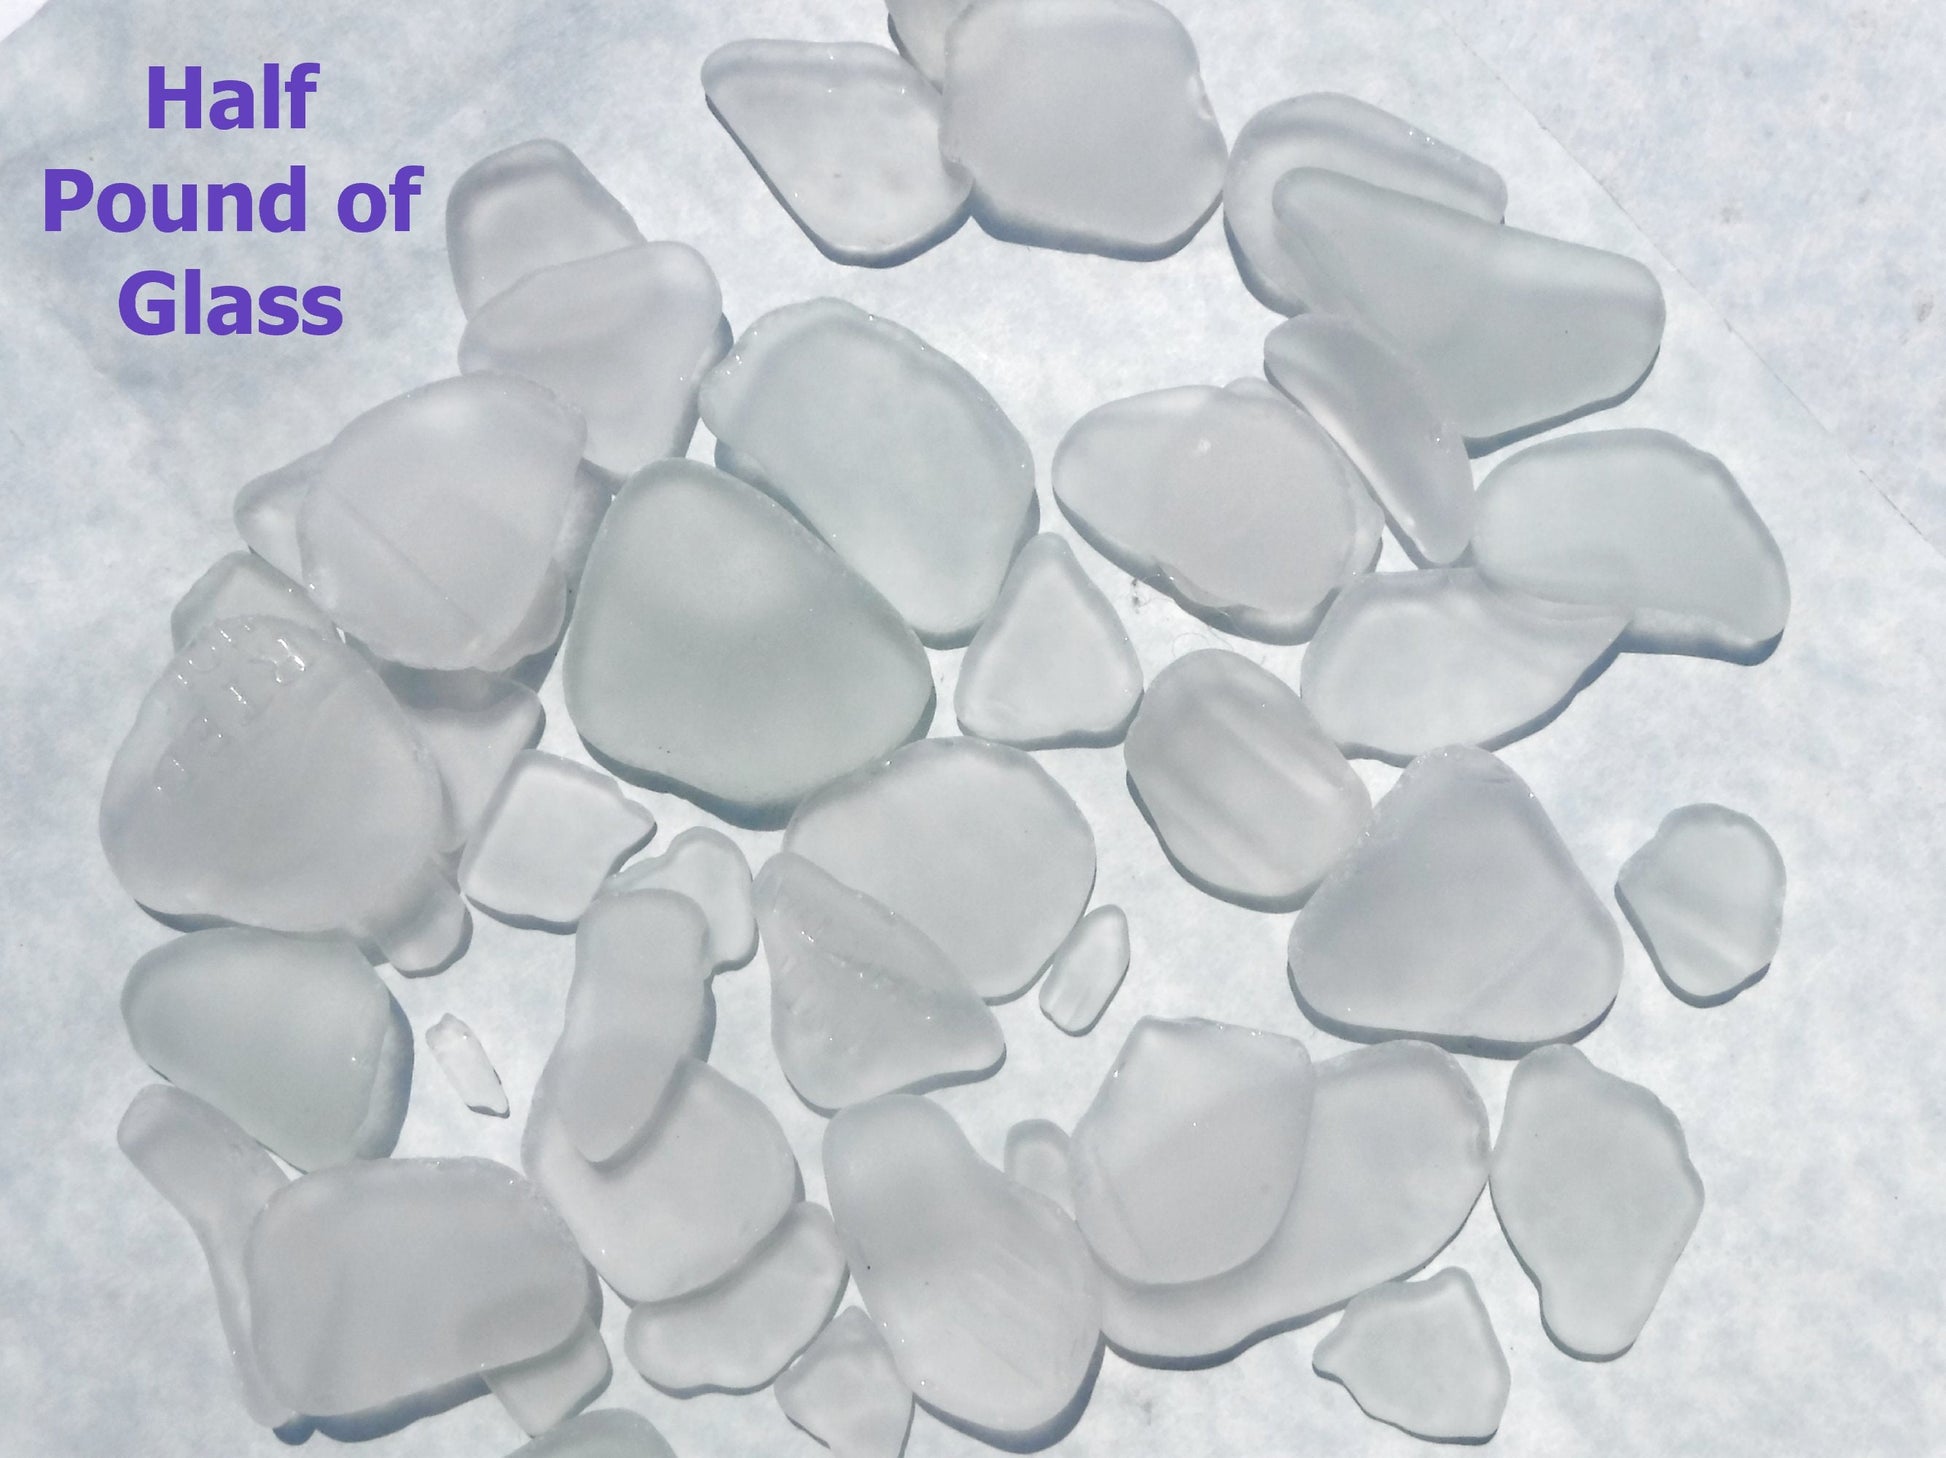 Tumbled Glass Clear Frosted - Half pound - Mosaic Tiles Vase Fillers Craft Supplies Cottage Decor Wedding Favors